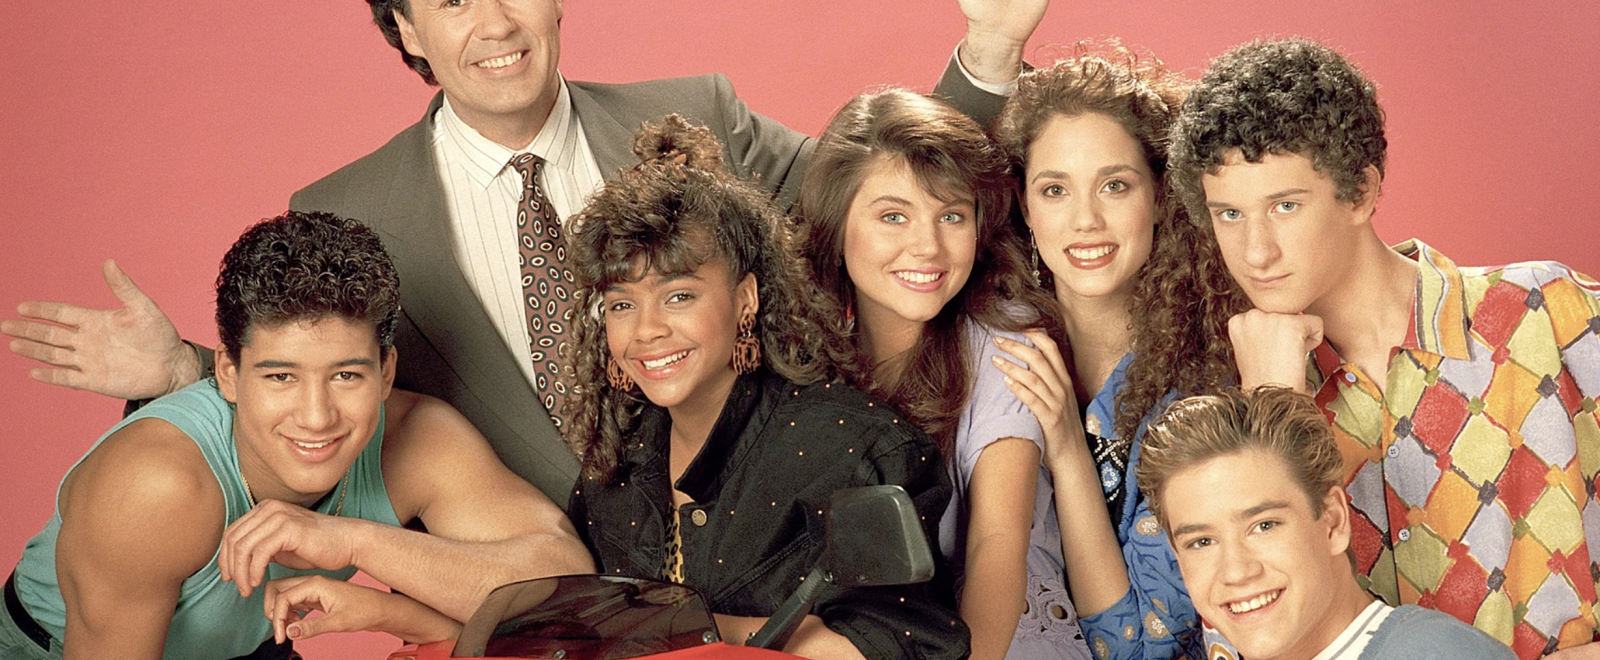 Dustin Diamond’s ‘Saved By The Bell’ Co-Stars Are Paying Tribute To The Late Actor